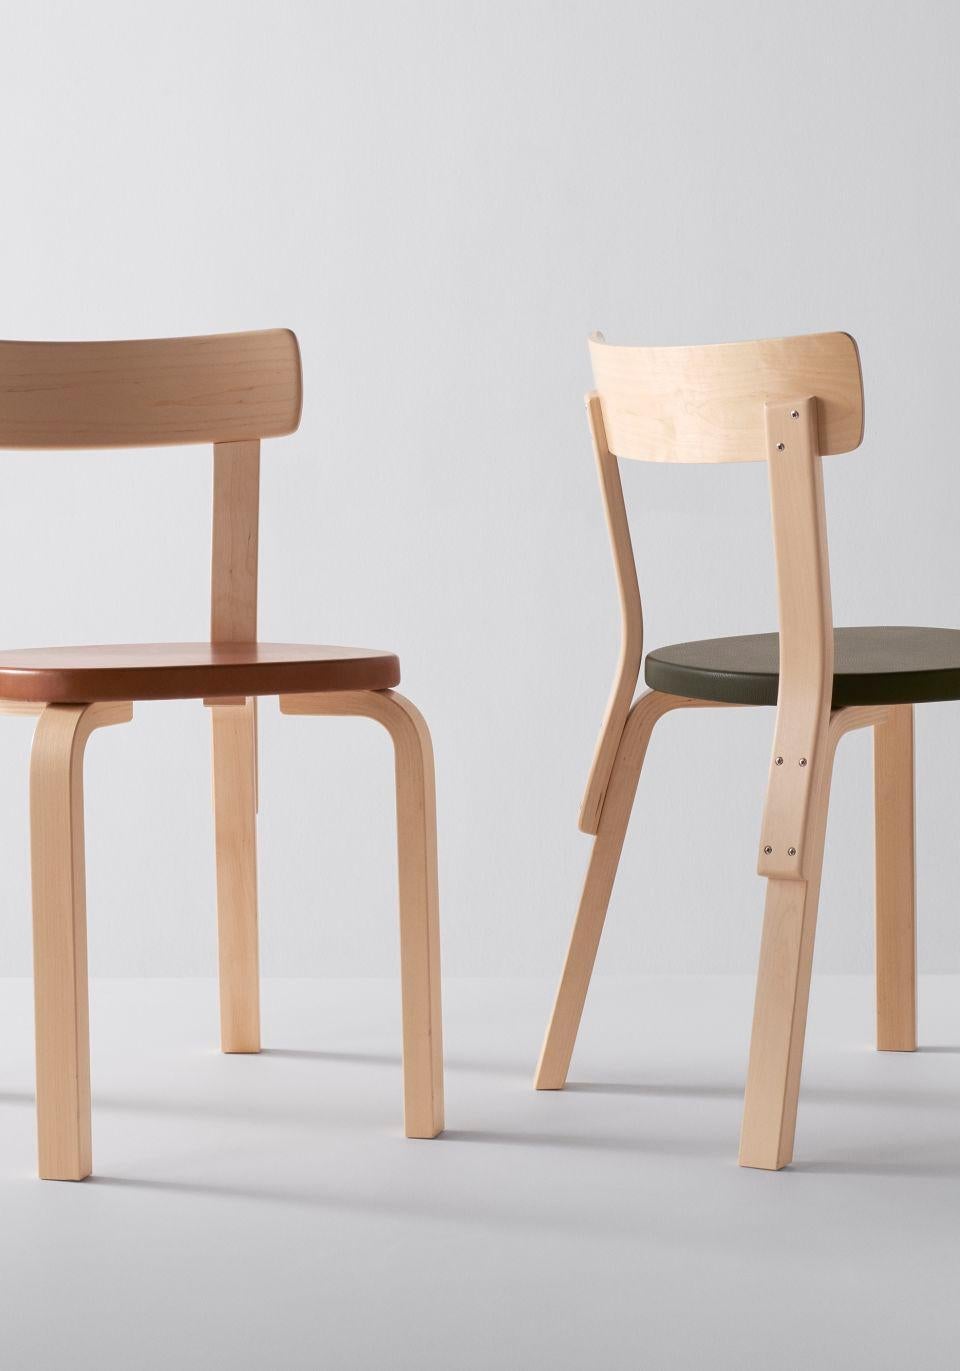 Authentic Chair 69 in birch by Alvar Aalto & Artek. Chair 69 is one of Artek’s most popular chairs, a universal wooden chair in the tradition of classic kitchen and café chairs. With a broad seat and supportive backrest, Chair 69 exudes durability